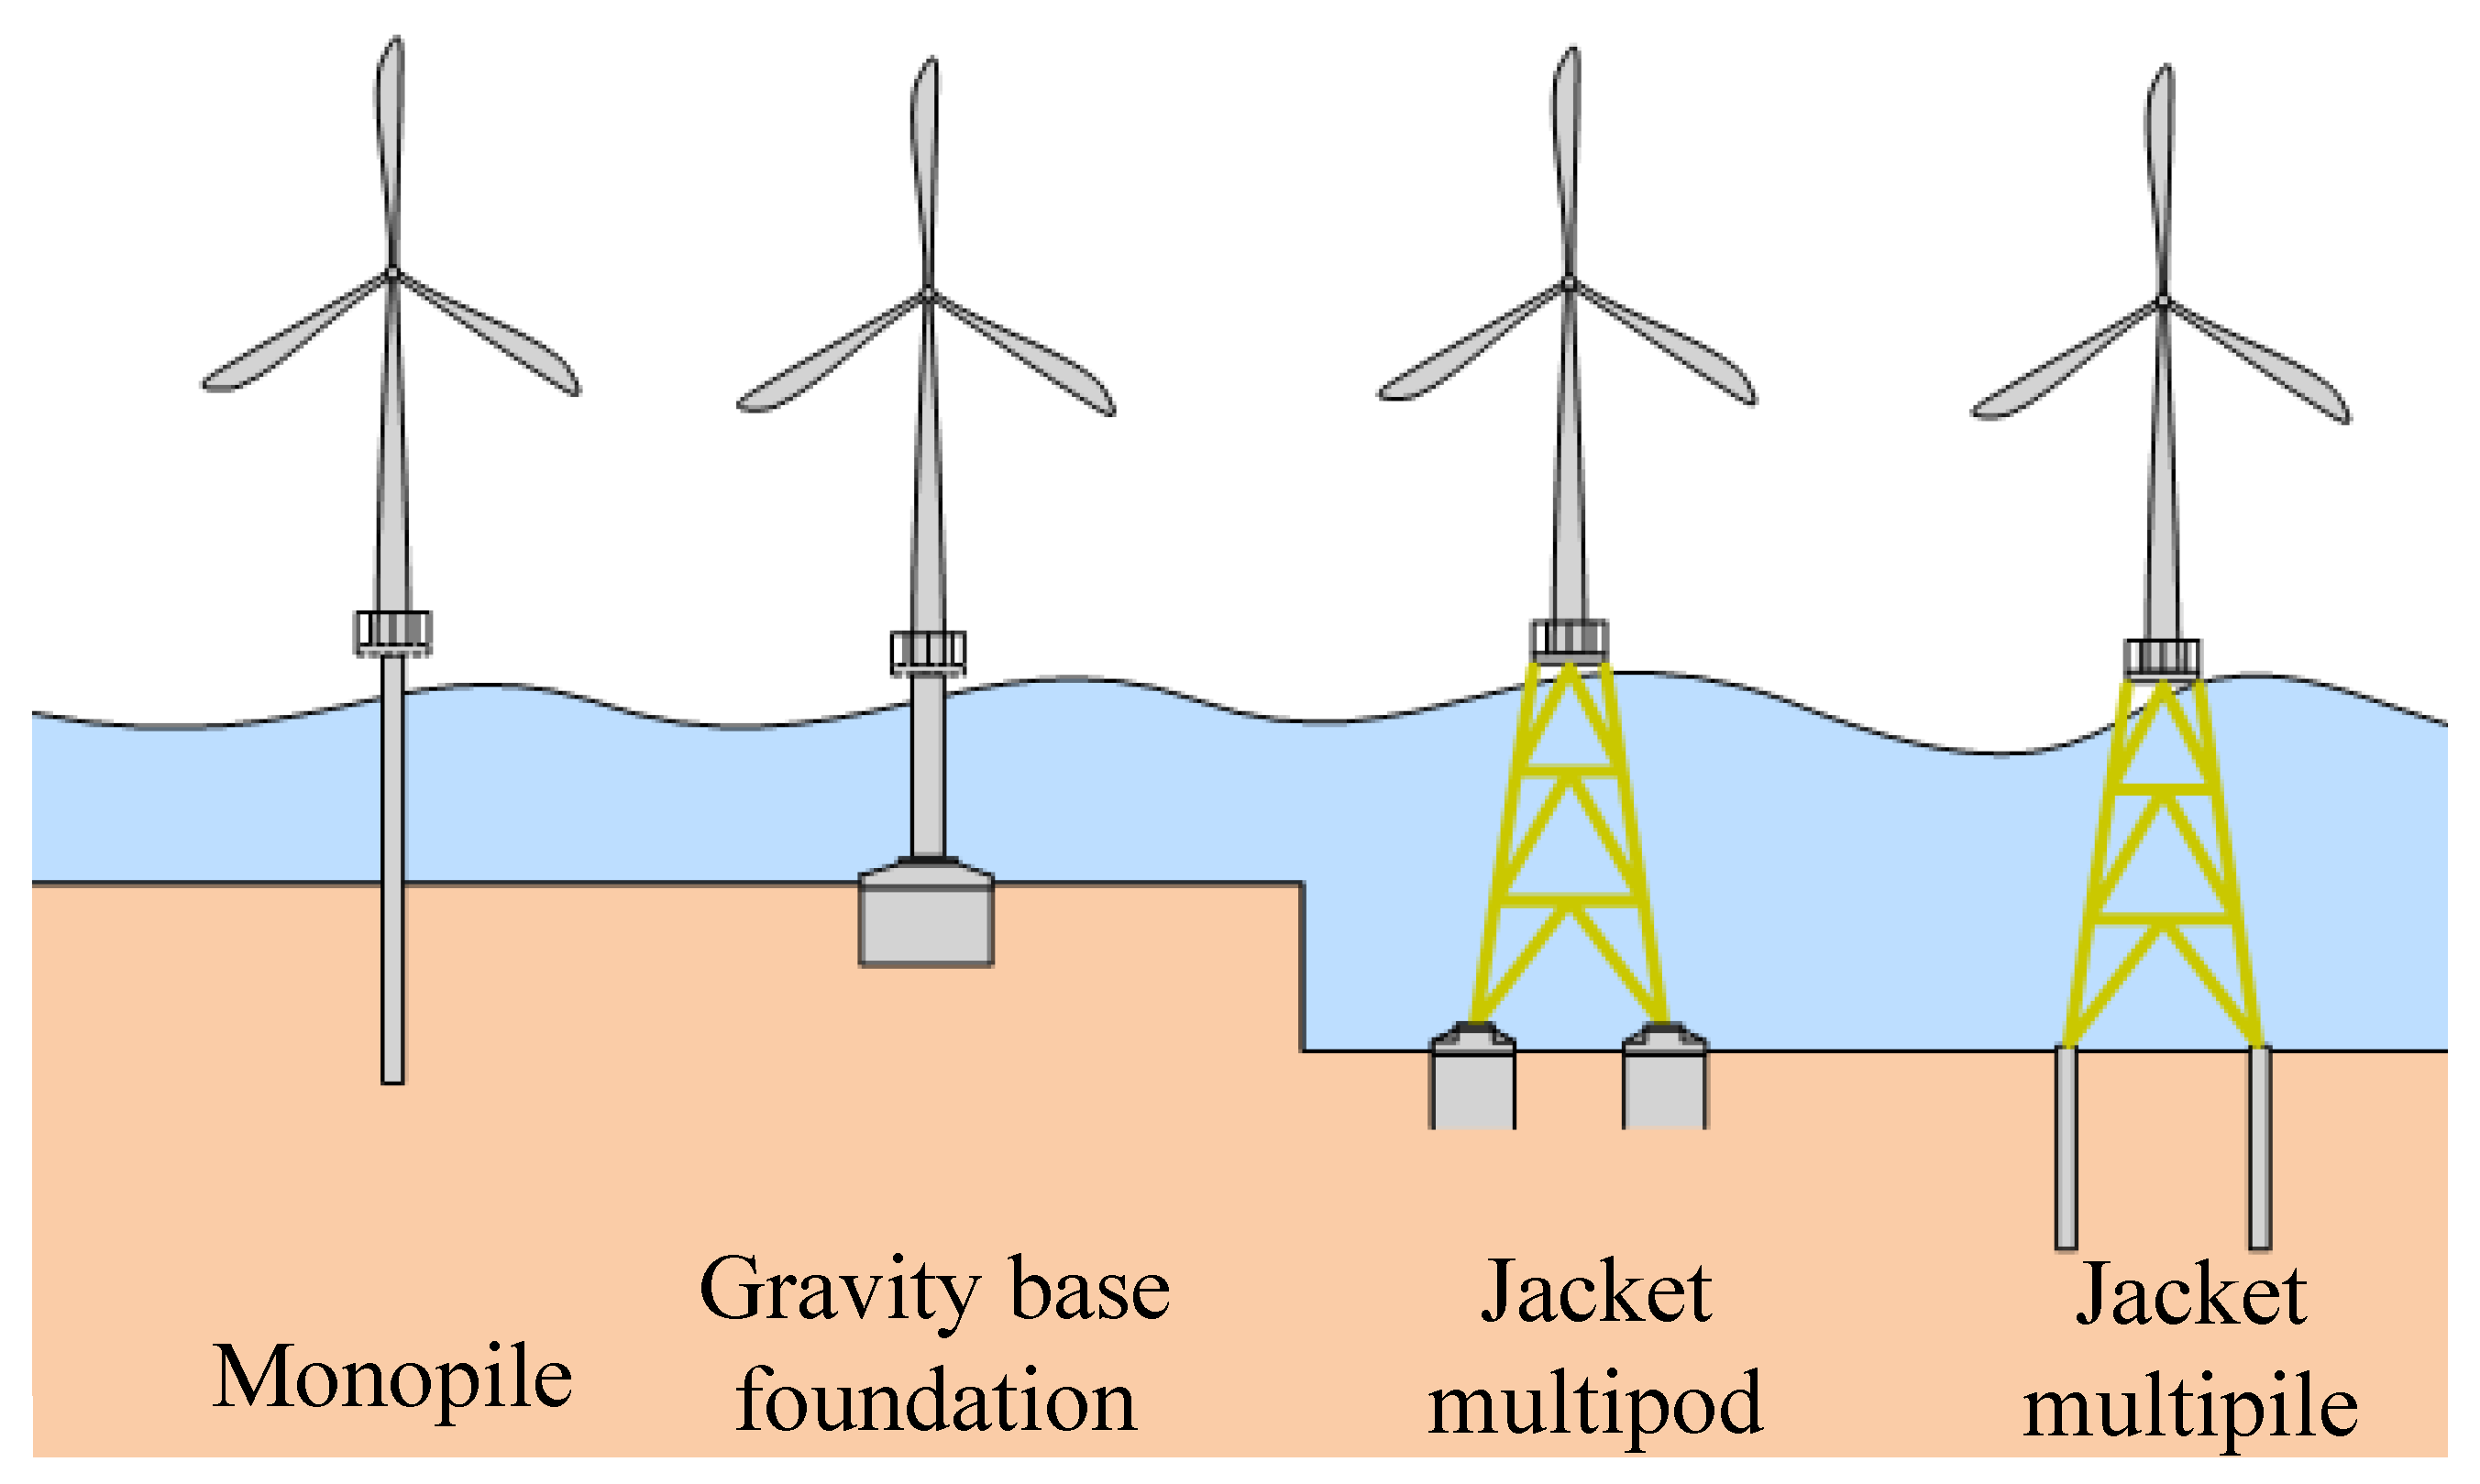 JMSE | Free Full-Text | Time Domain Nonlinear Dynamic Response Analysis of  Offshore Wind Turbines on Gravity Base Foundation under Wind and Wave Loads